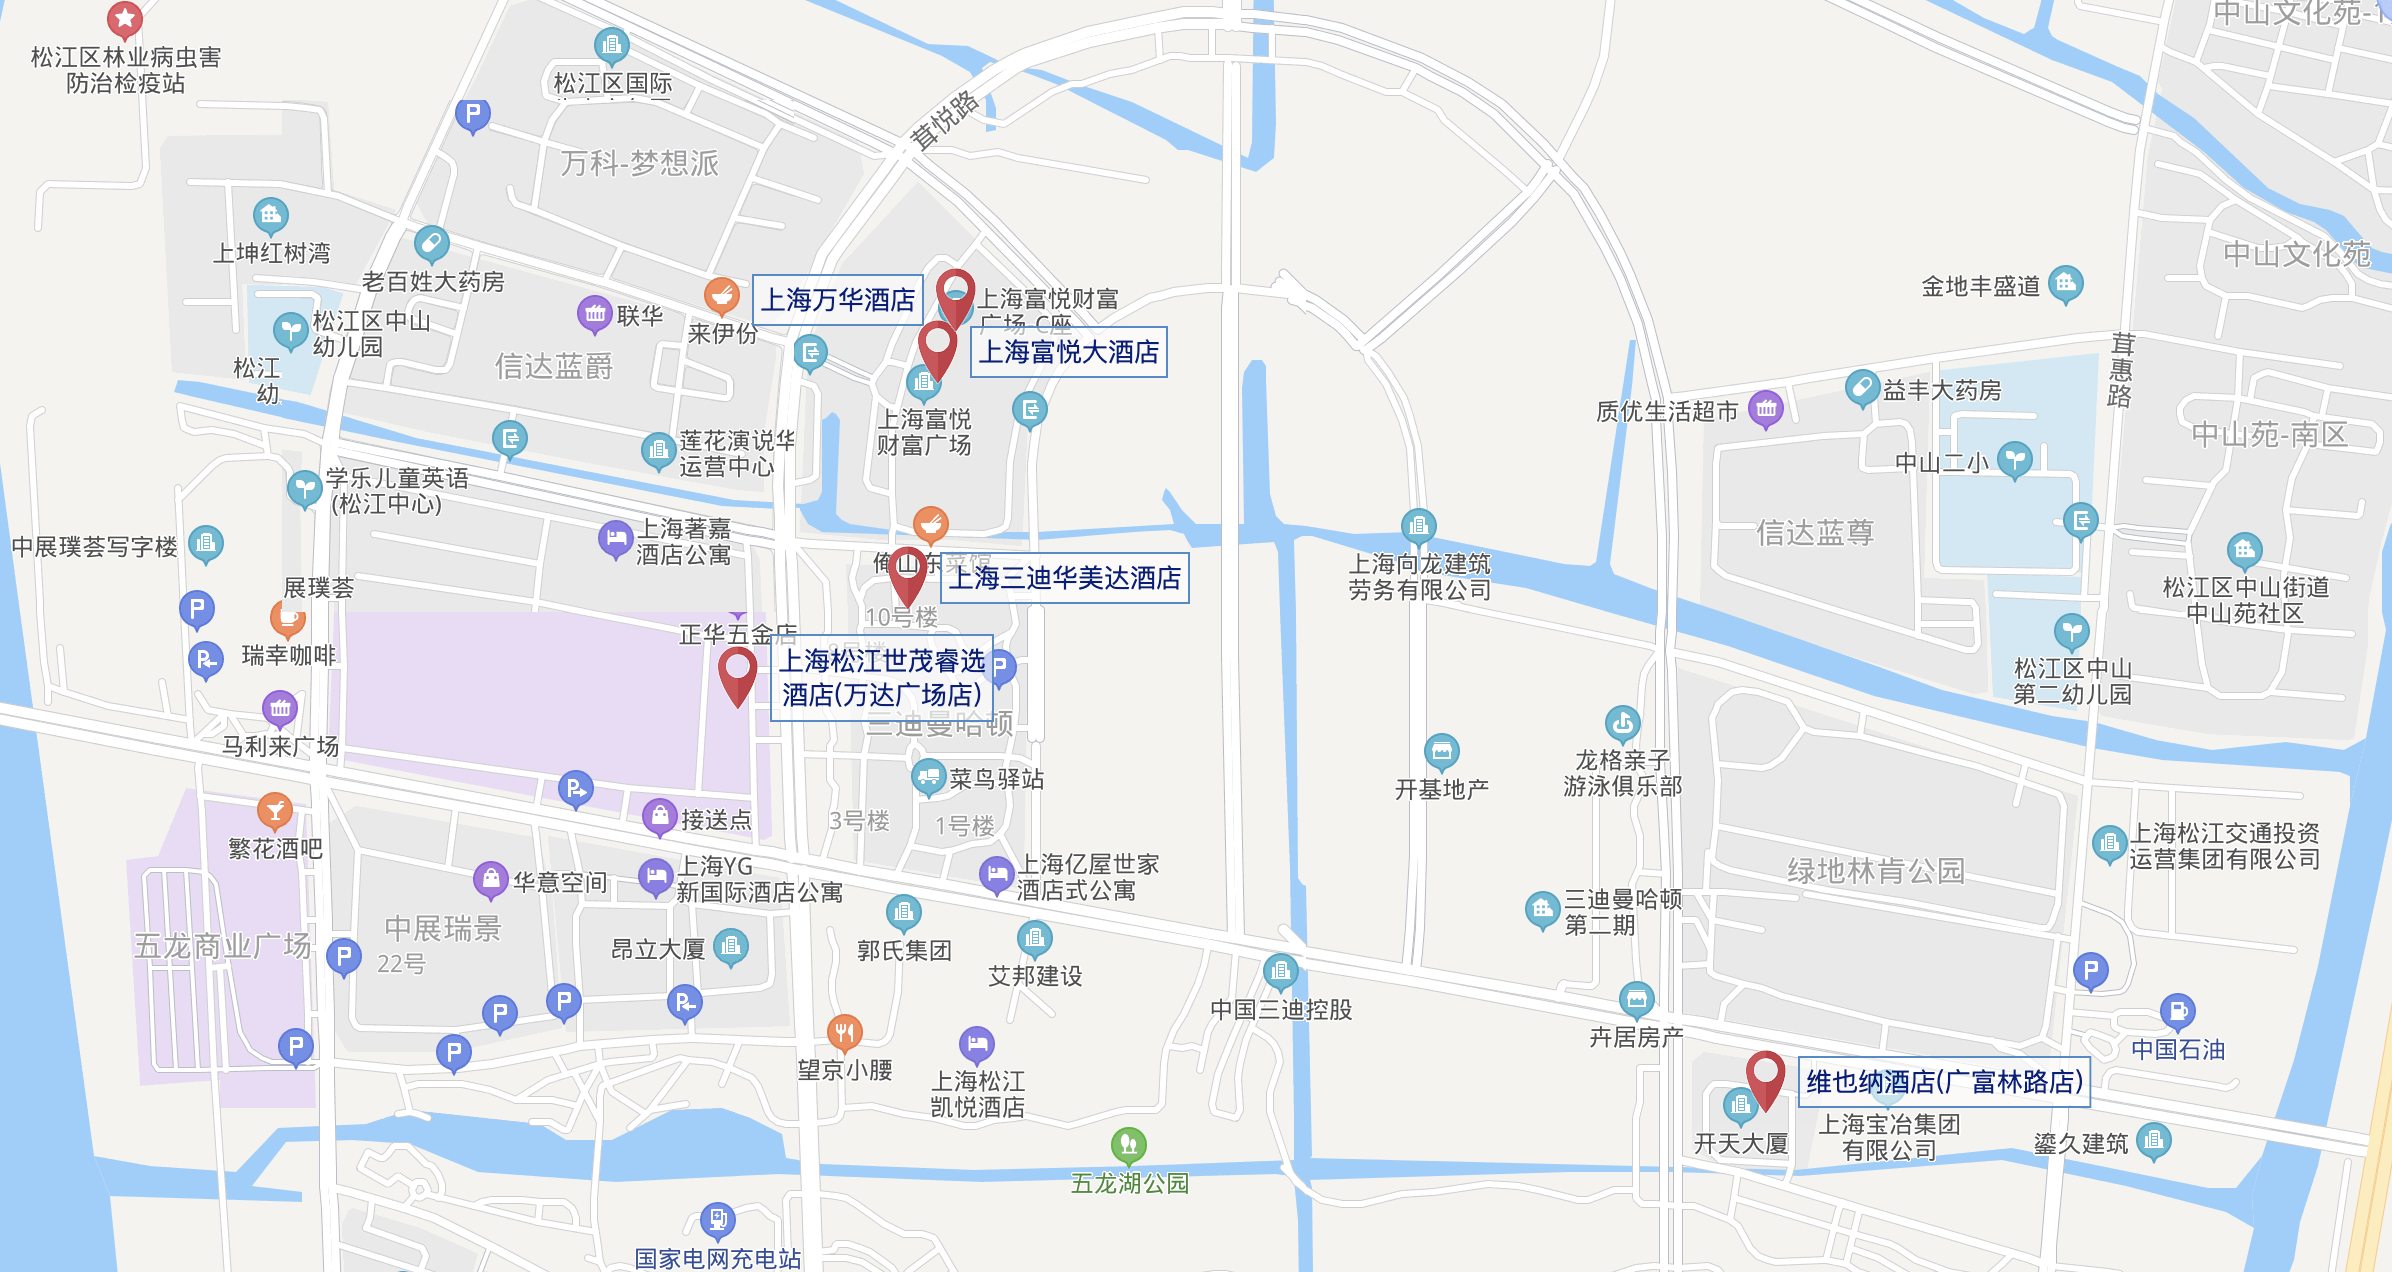 map of hotels